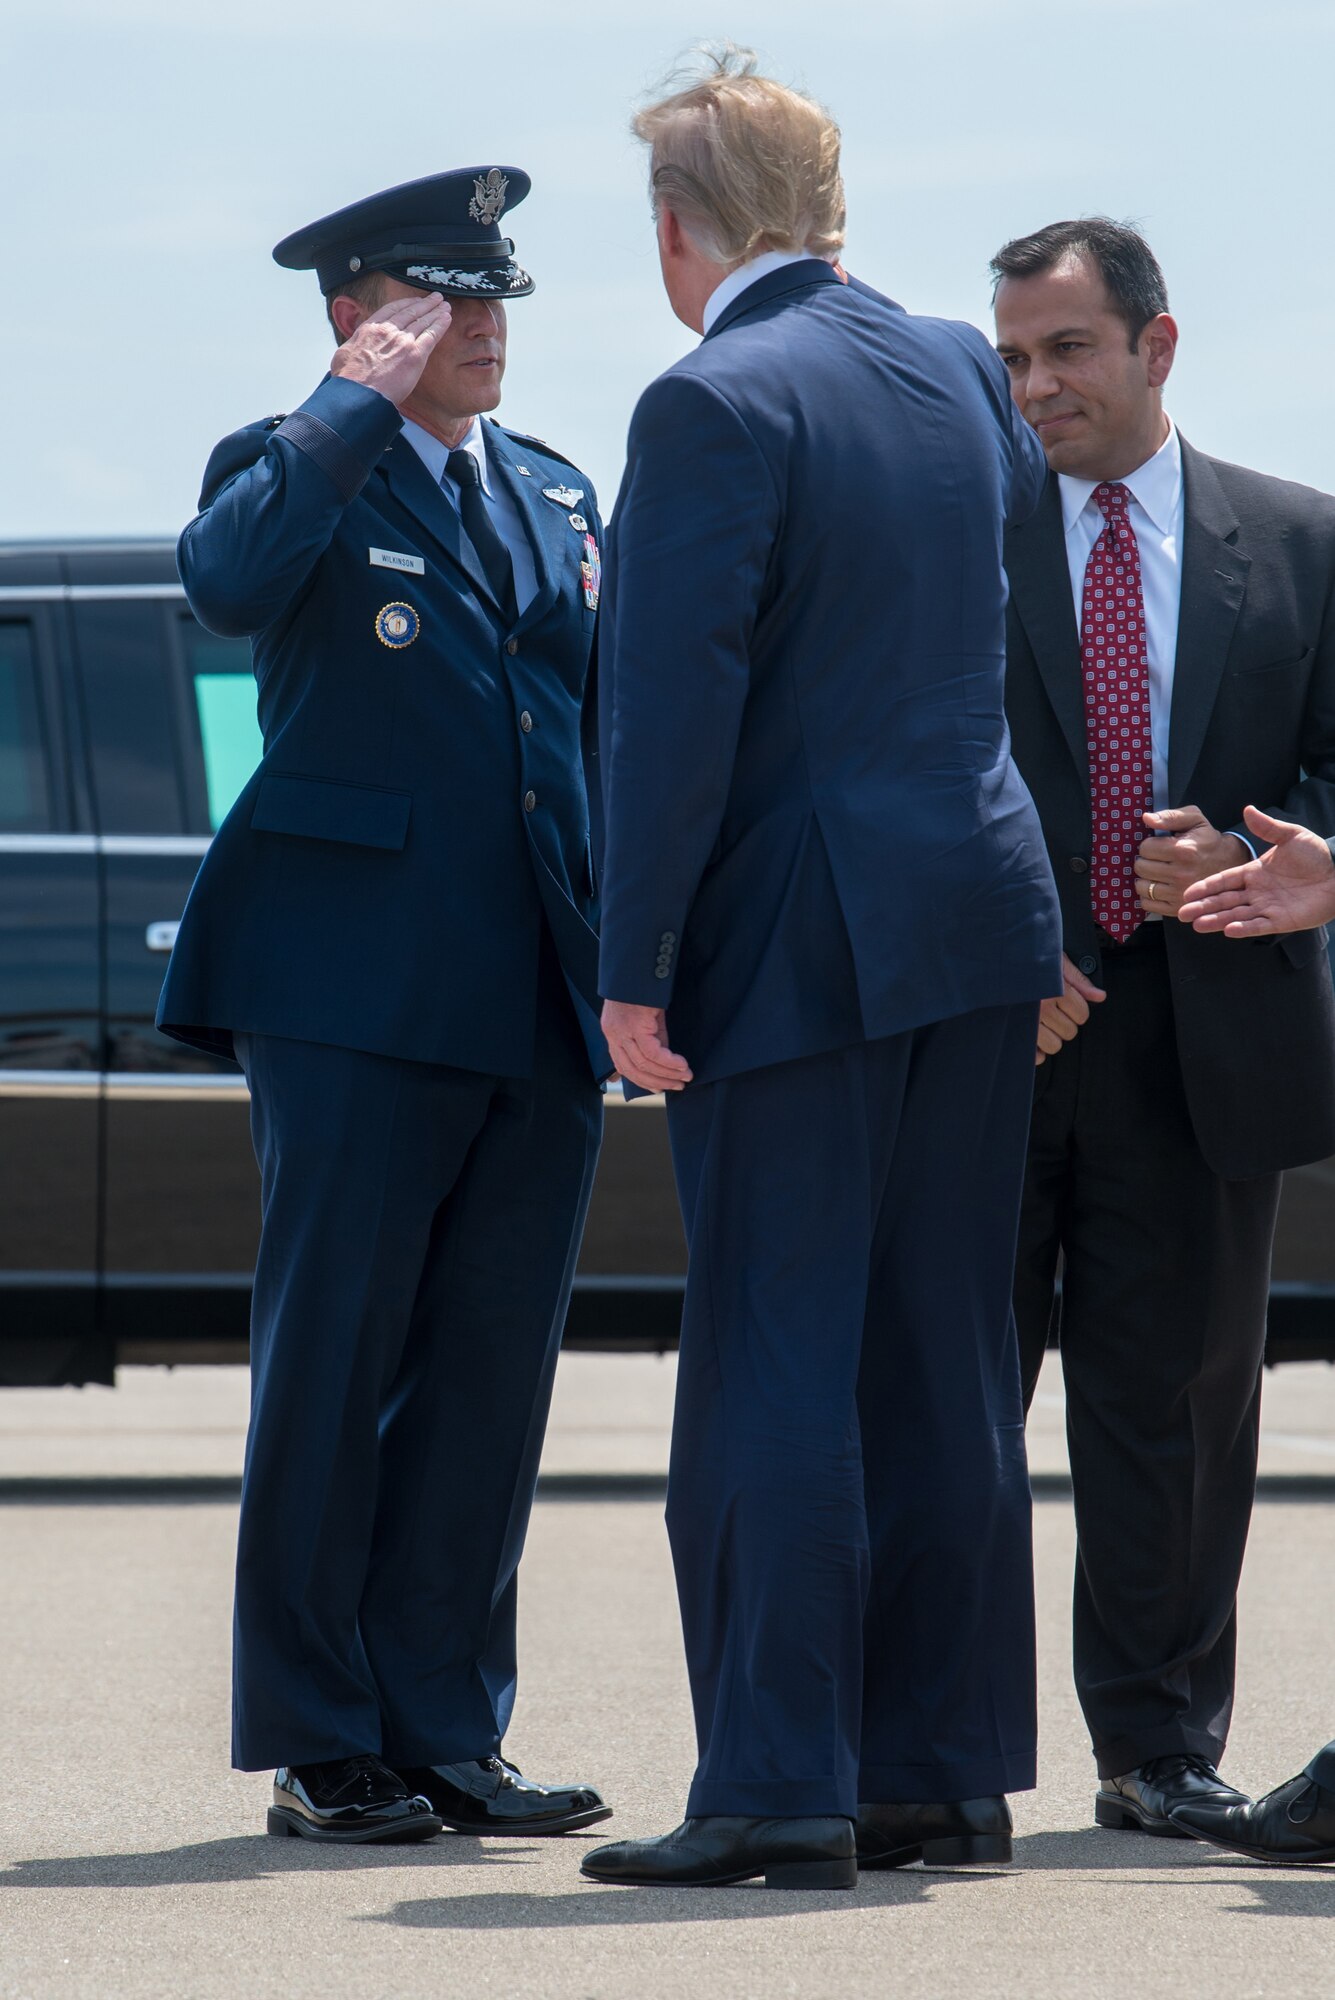 President Donald Trump greets Brig. Gen. Jeffrey Wilkinson, Kentucky’s assistant adjutant general for Air, at the Kentucky Air National Guard Base in Louisville, Ky., Aug. 21, 2019. Trump was in town to speak at an AMVETS convention and attend a fundraiser for Kentucky Gov. Matt Bevin’s re-election campaign. (U.S. Air National Guard photo by Staff Sgt. Joshua Horton)